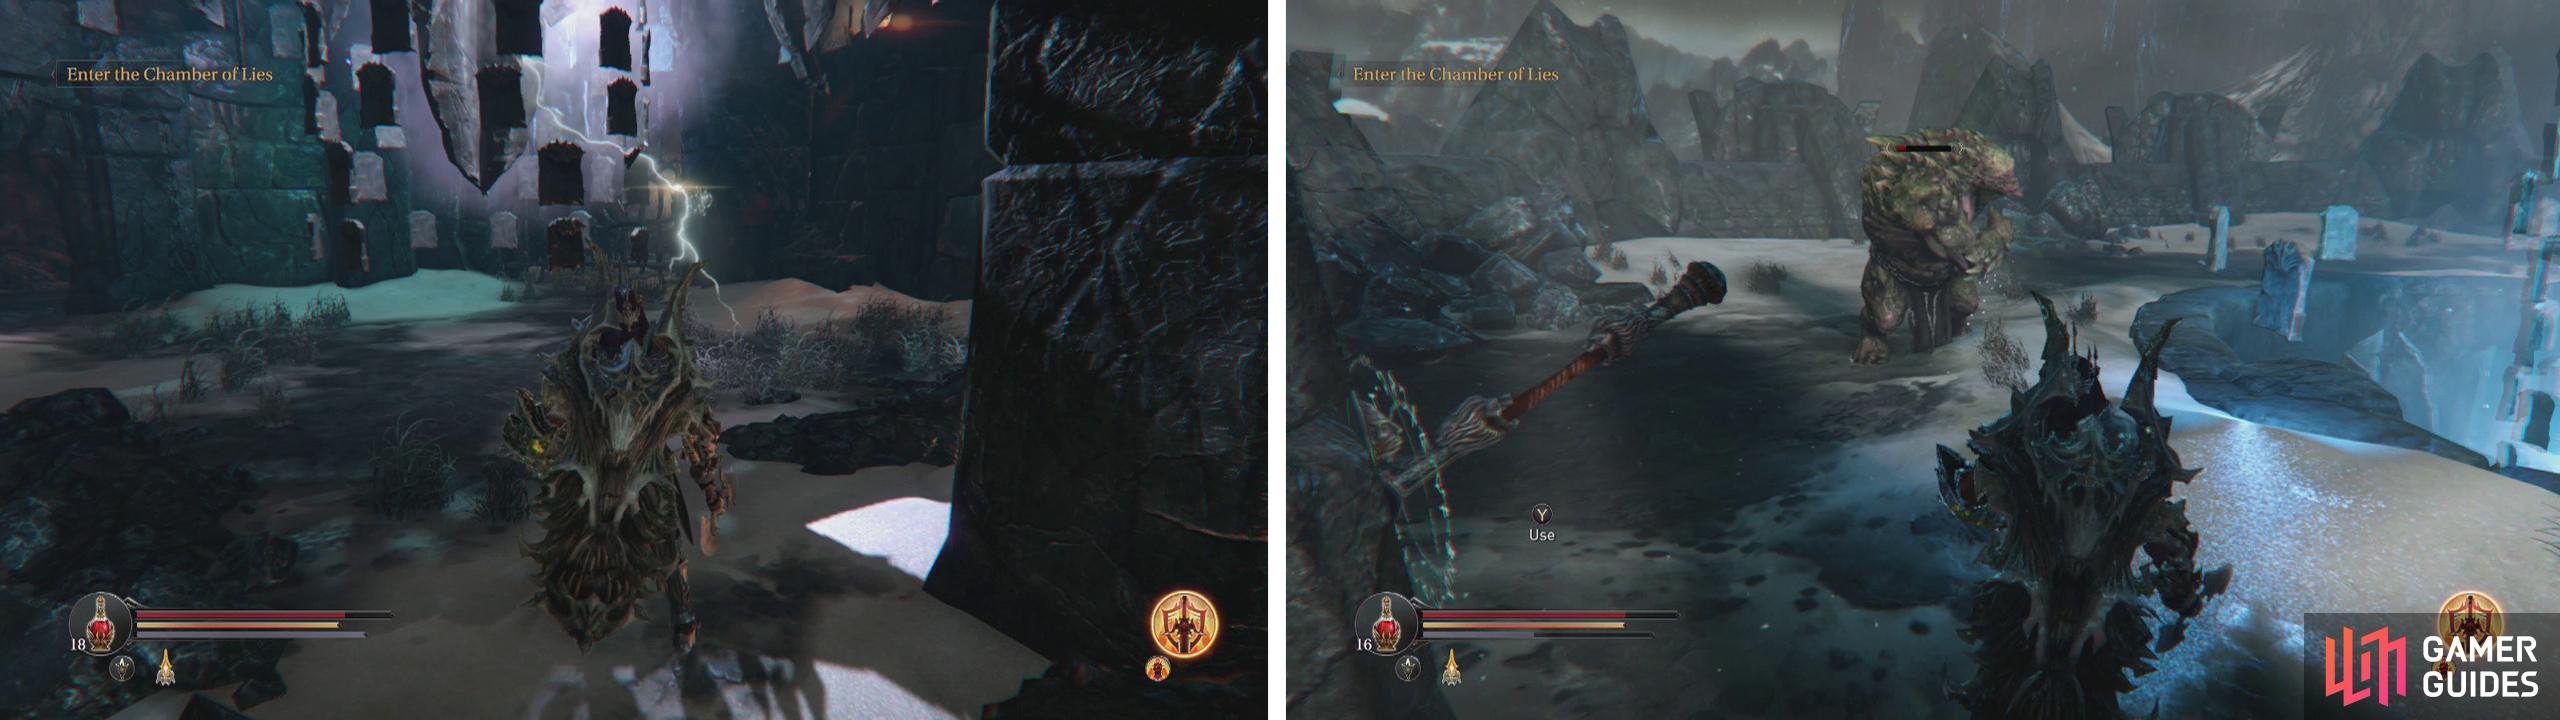 Enter the room with floating tablets for a scene (left). Climb to the roof to fight the Poison Beast and pull the lever (right).